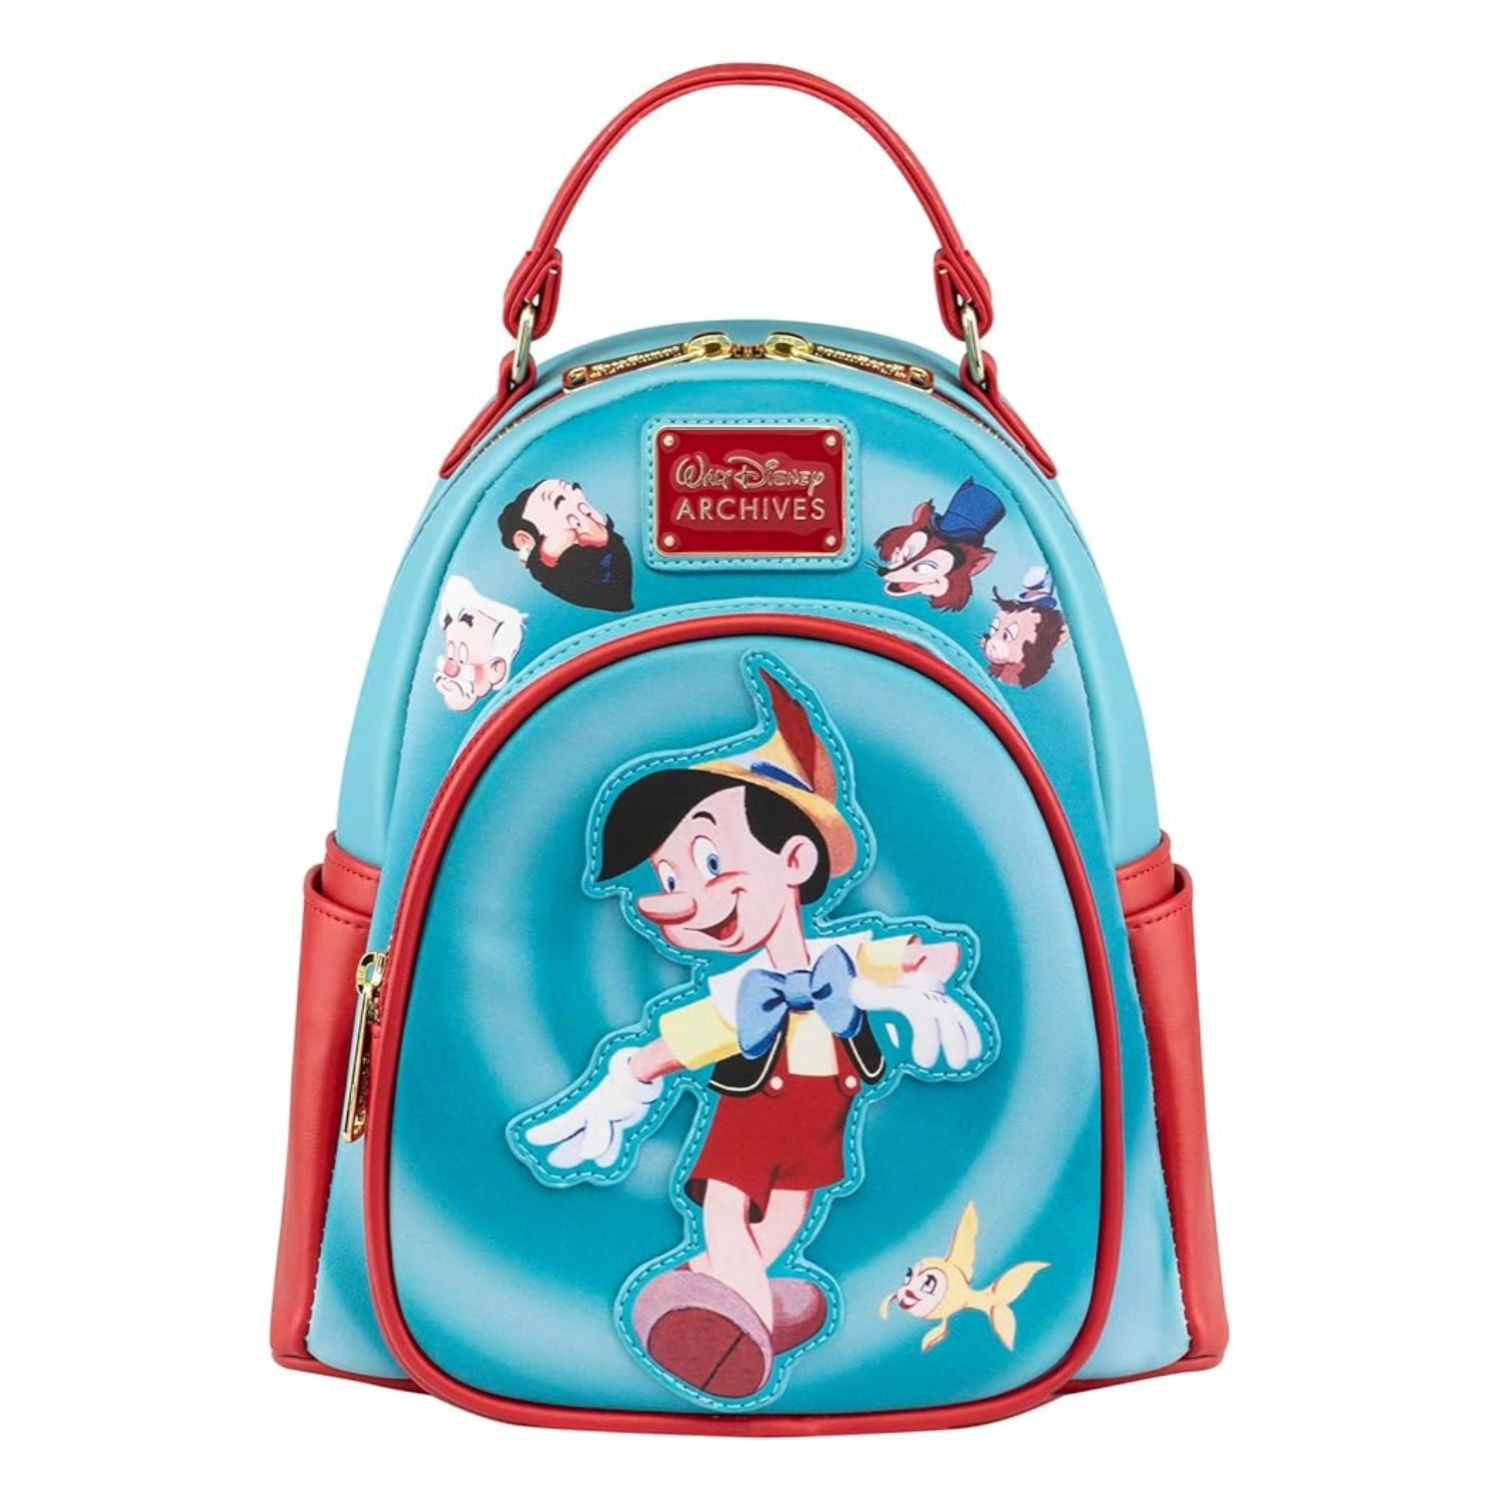 This light blue bag has characters from Pinocchio on it.